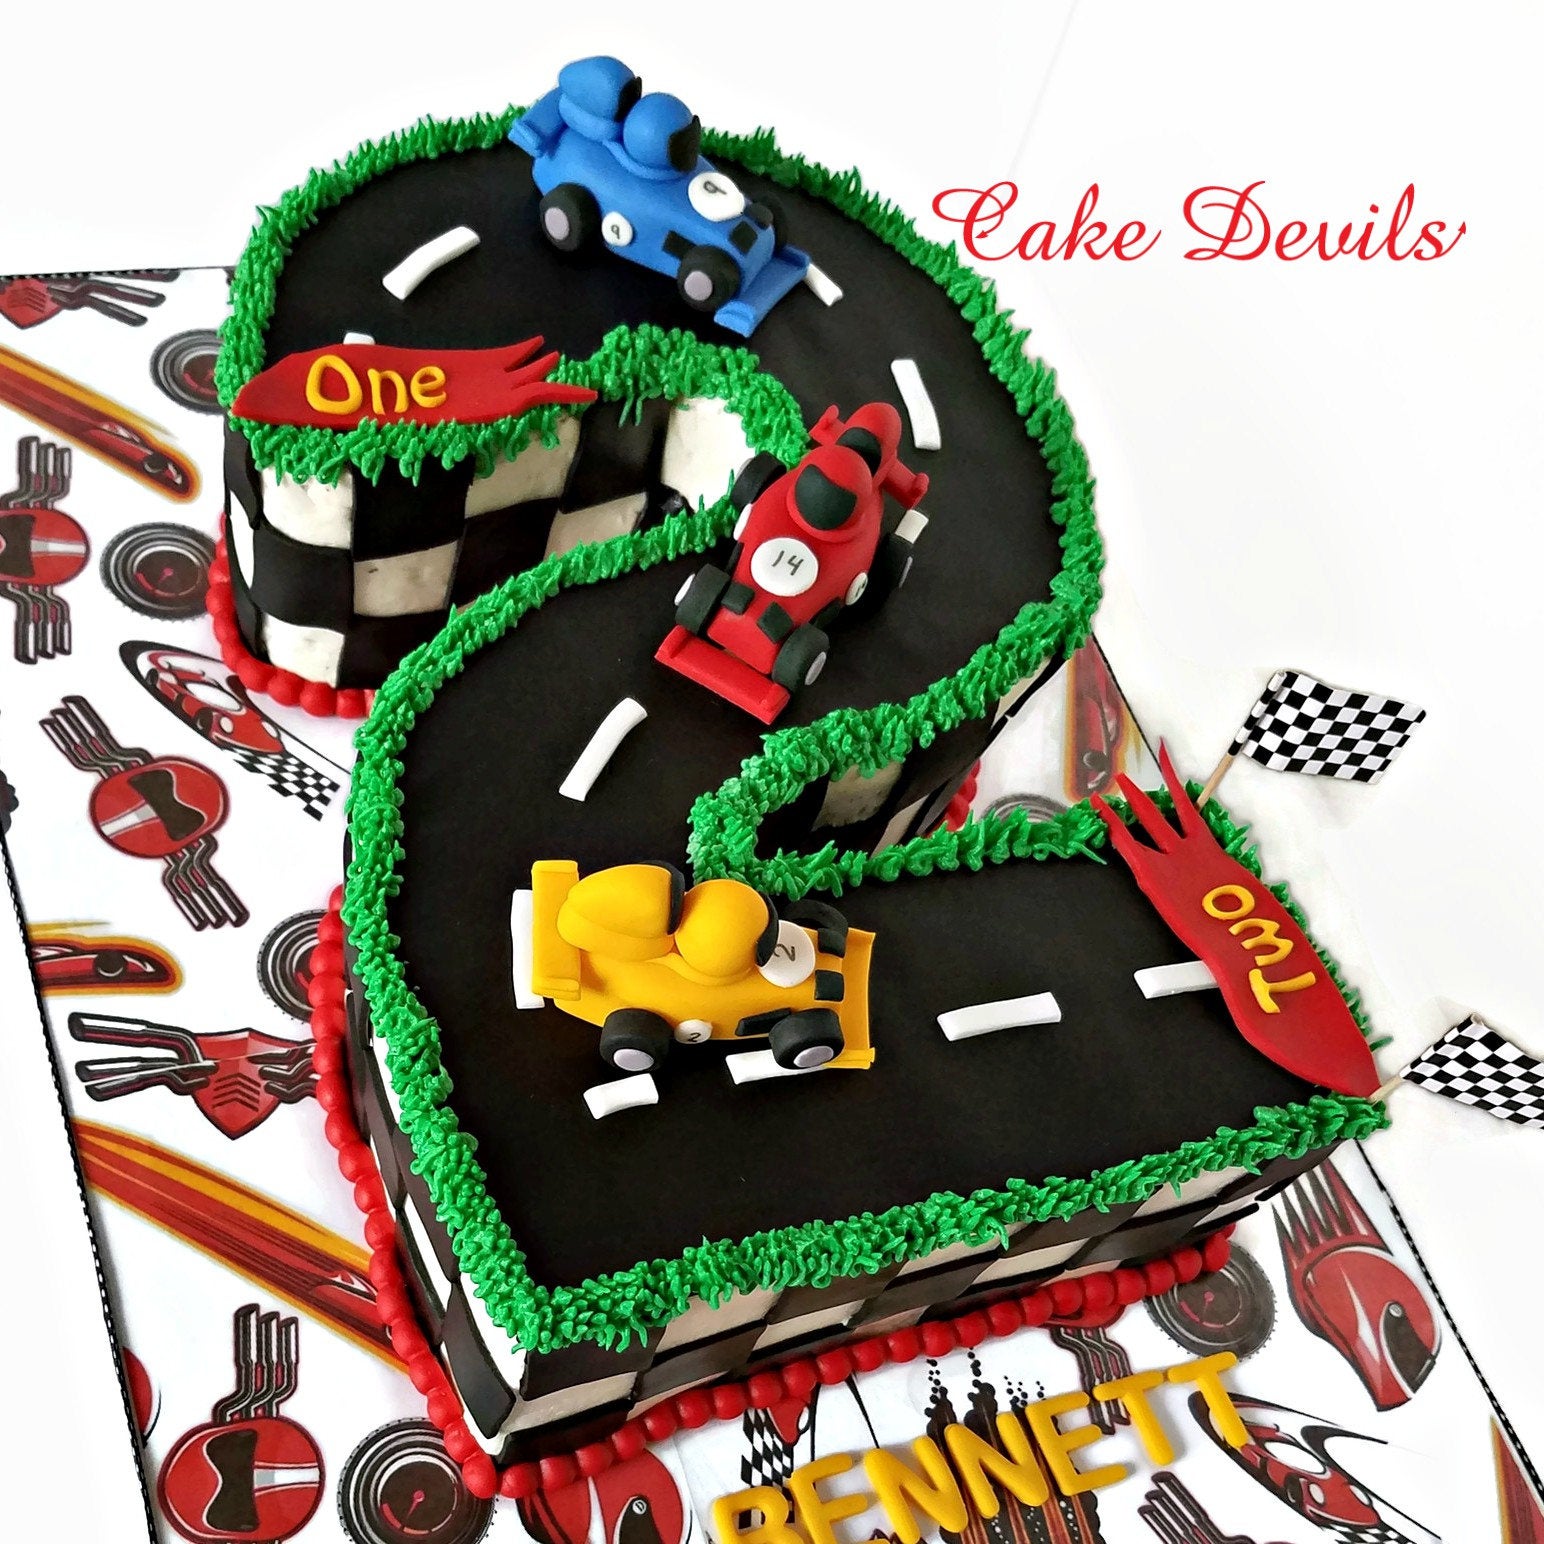 Cakes To Di For - Today's cakes: racing car birthday cake... | Facebook